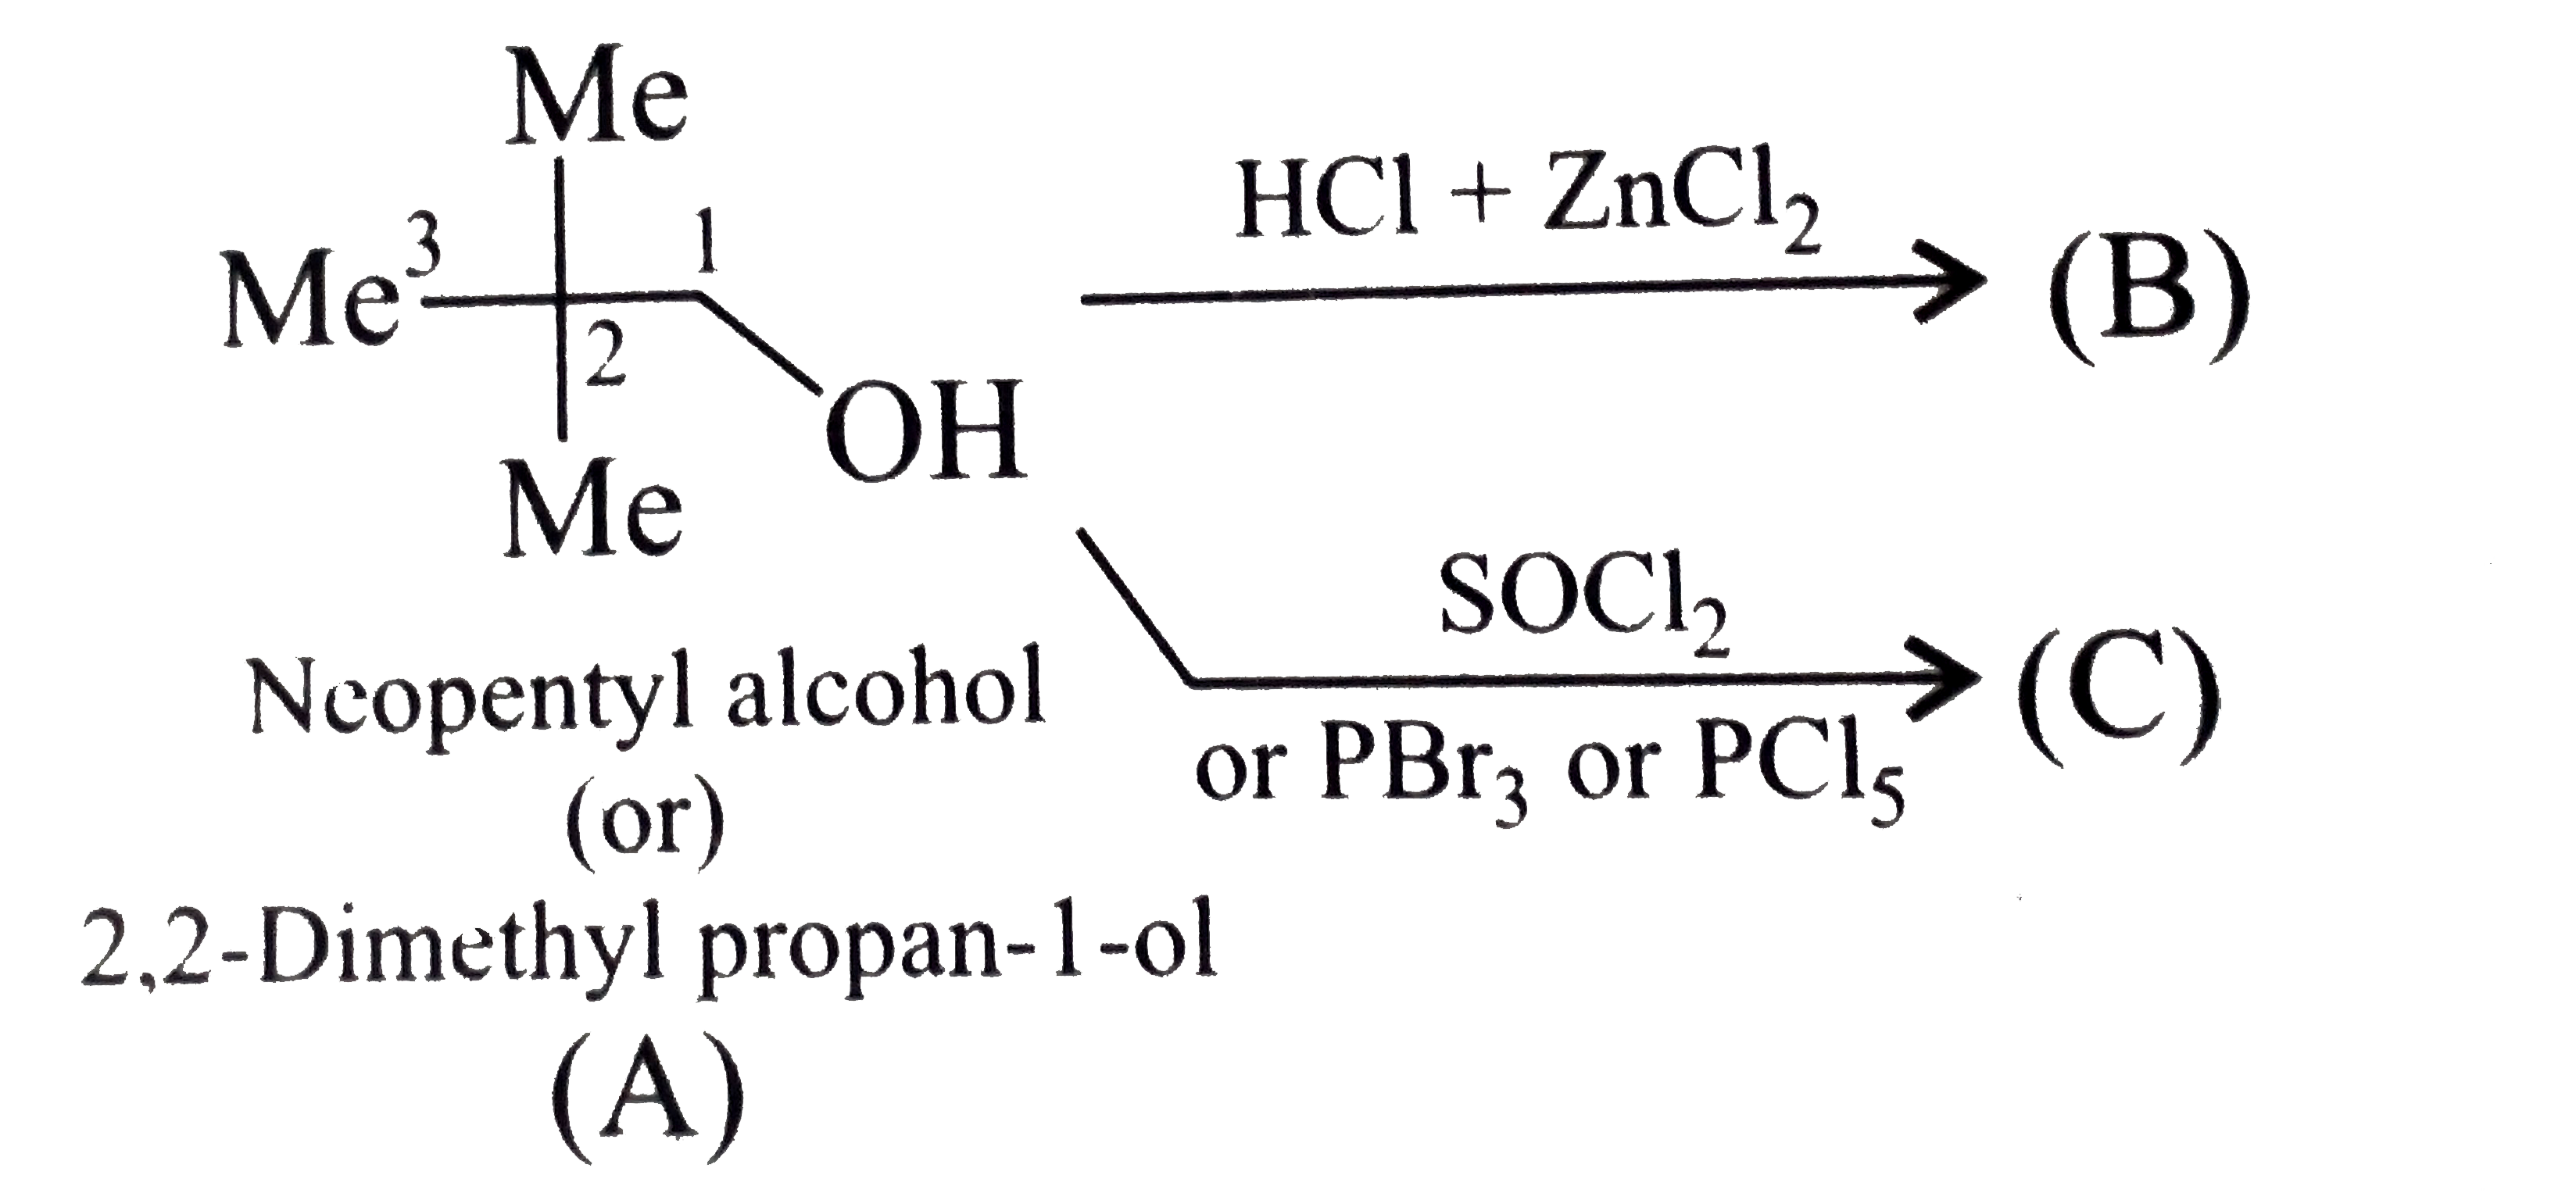 Give the product of the following reactions:   a.